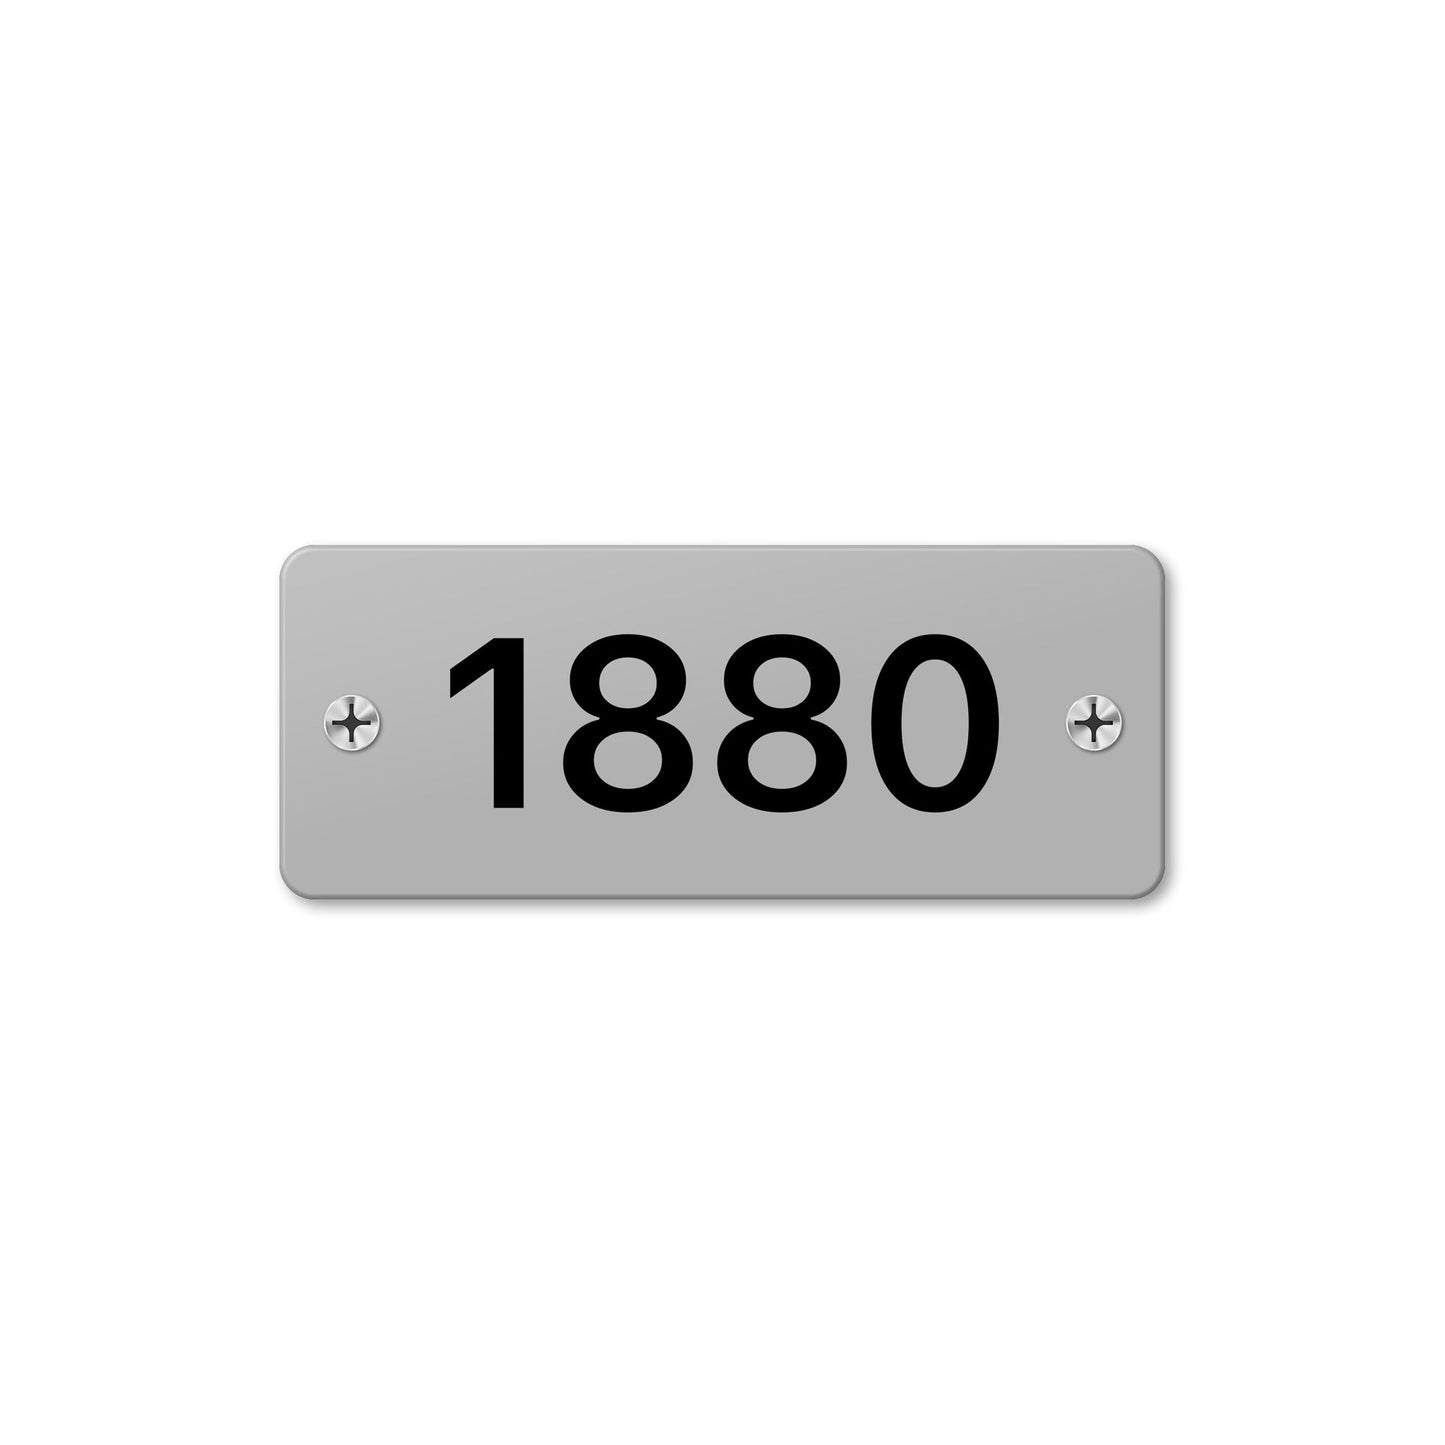 Numeral 1880